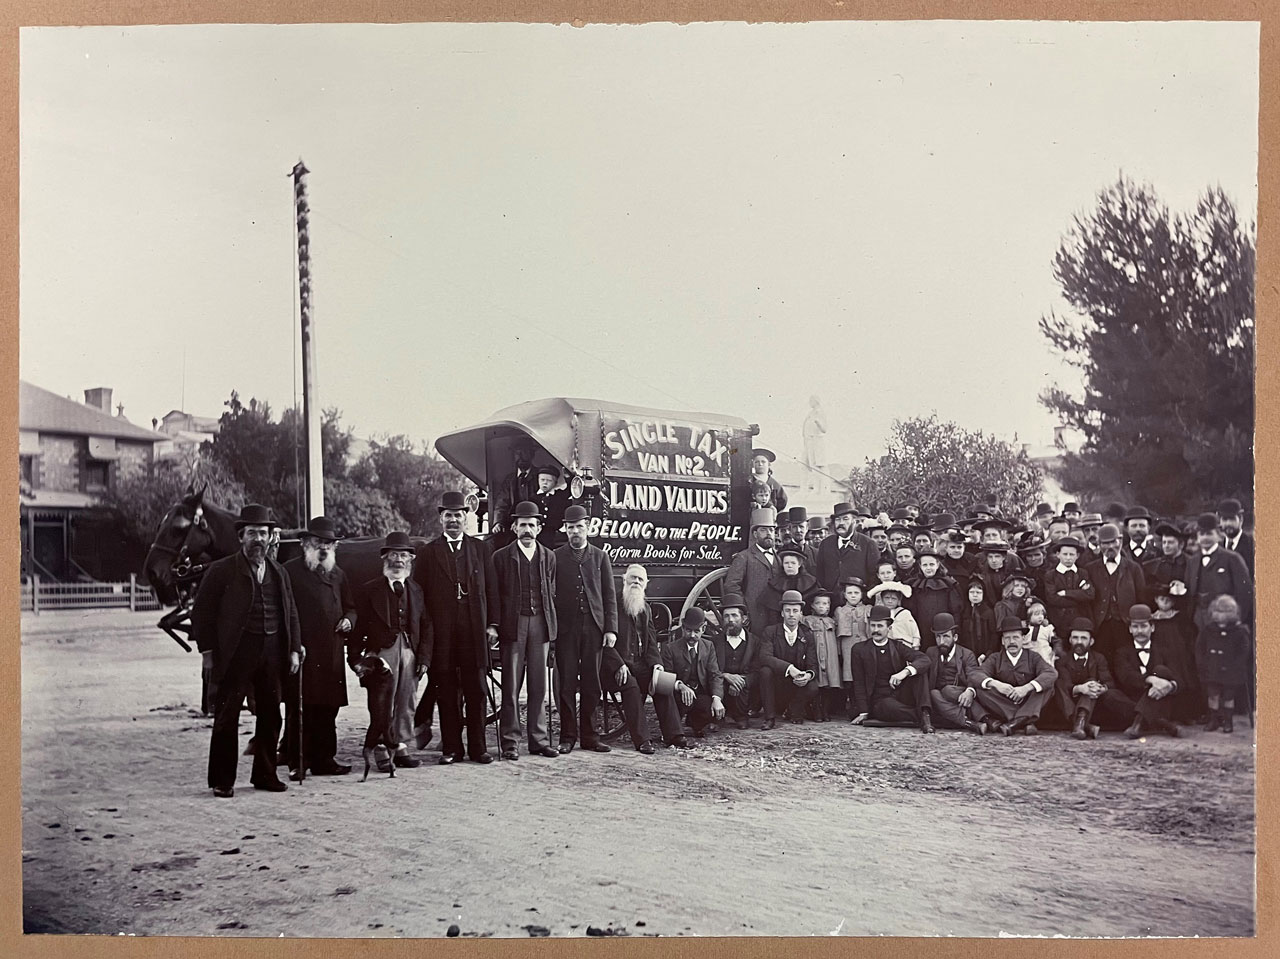 Launch of the Single Tax Van No. 2 Campaign, North Terrace, 10 August 1895. SLSA: B 78647   